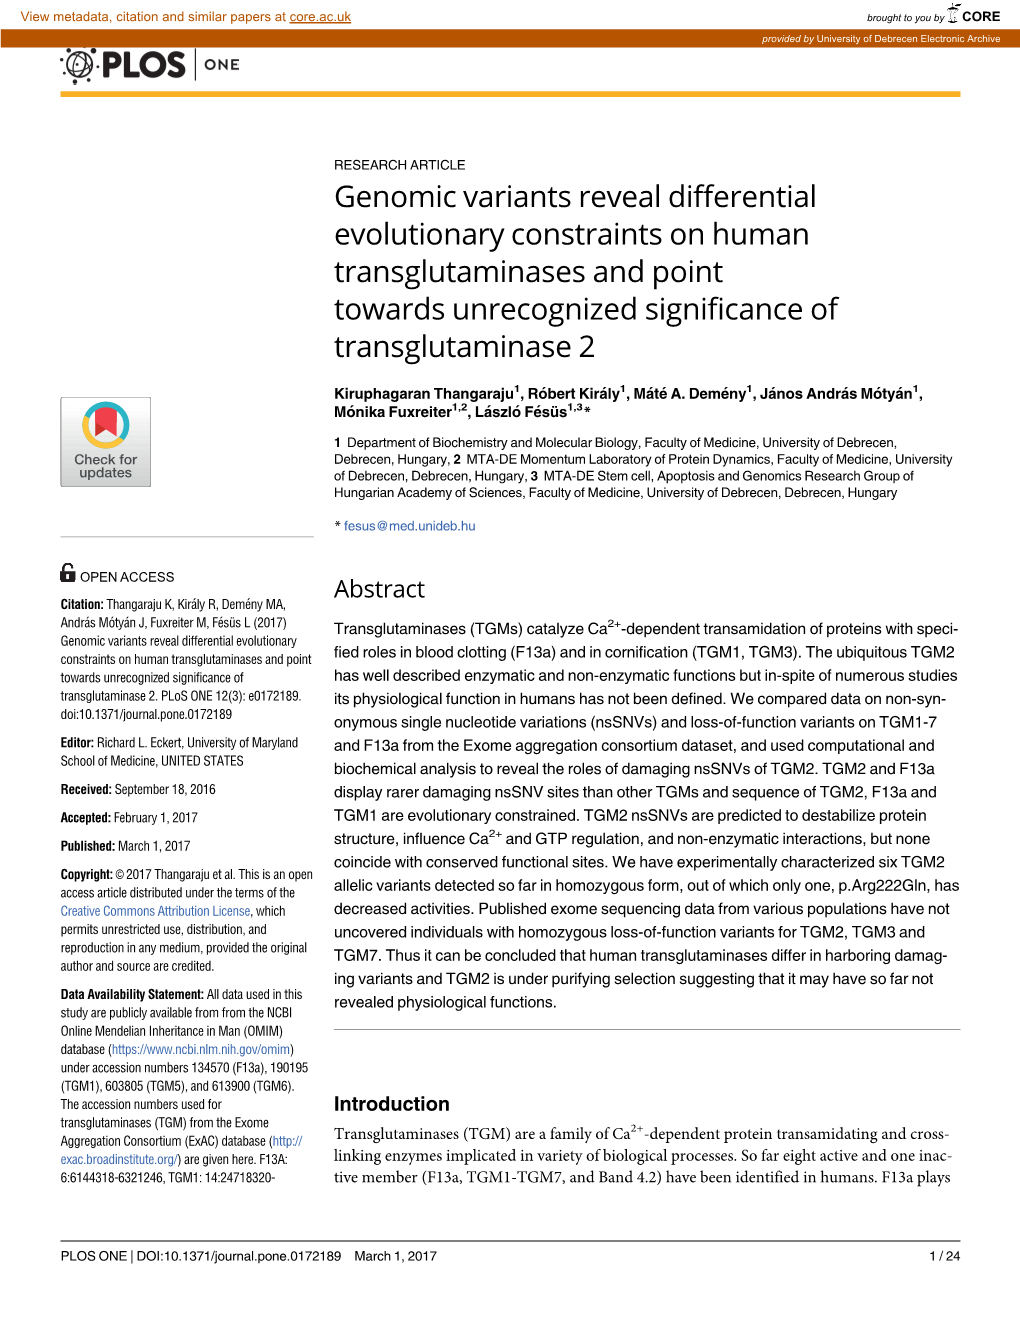 Genomic Variants Reveal Differential Evolutionary Constraints on Human Transglutaminases and Point Towards Unrecognized Significance of Transglutaminase 2